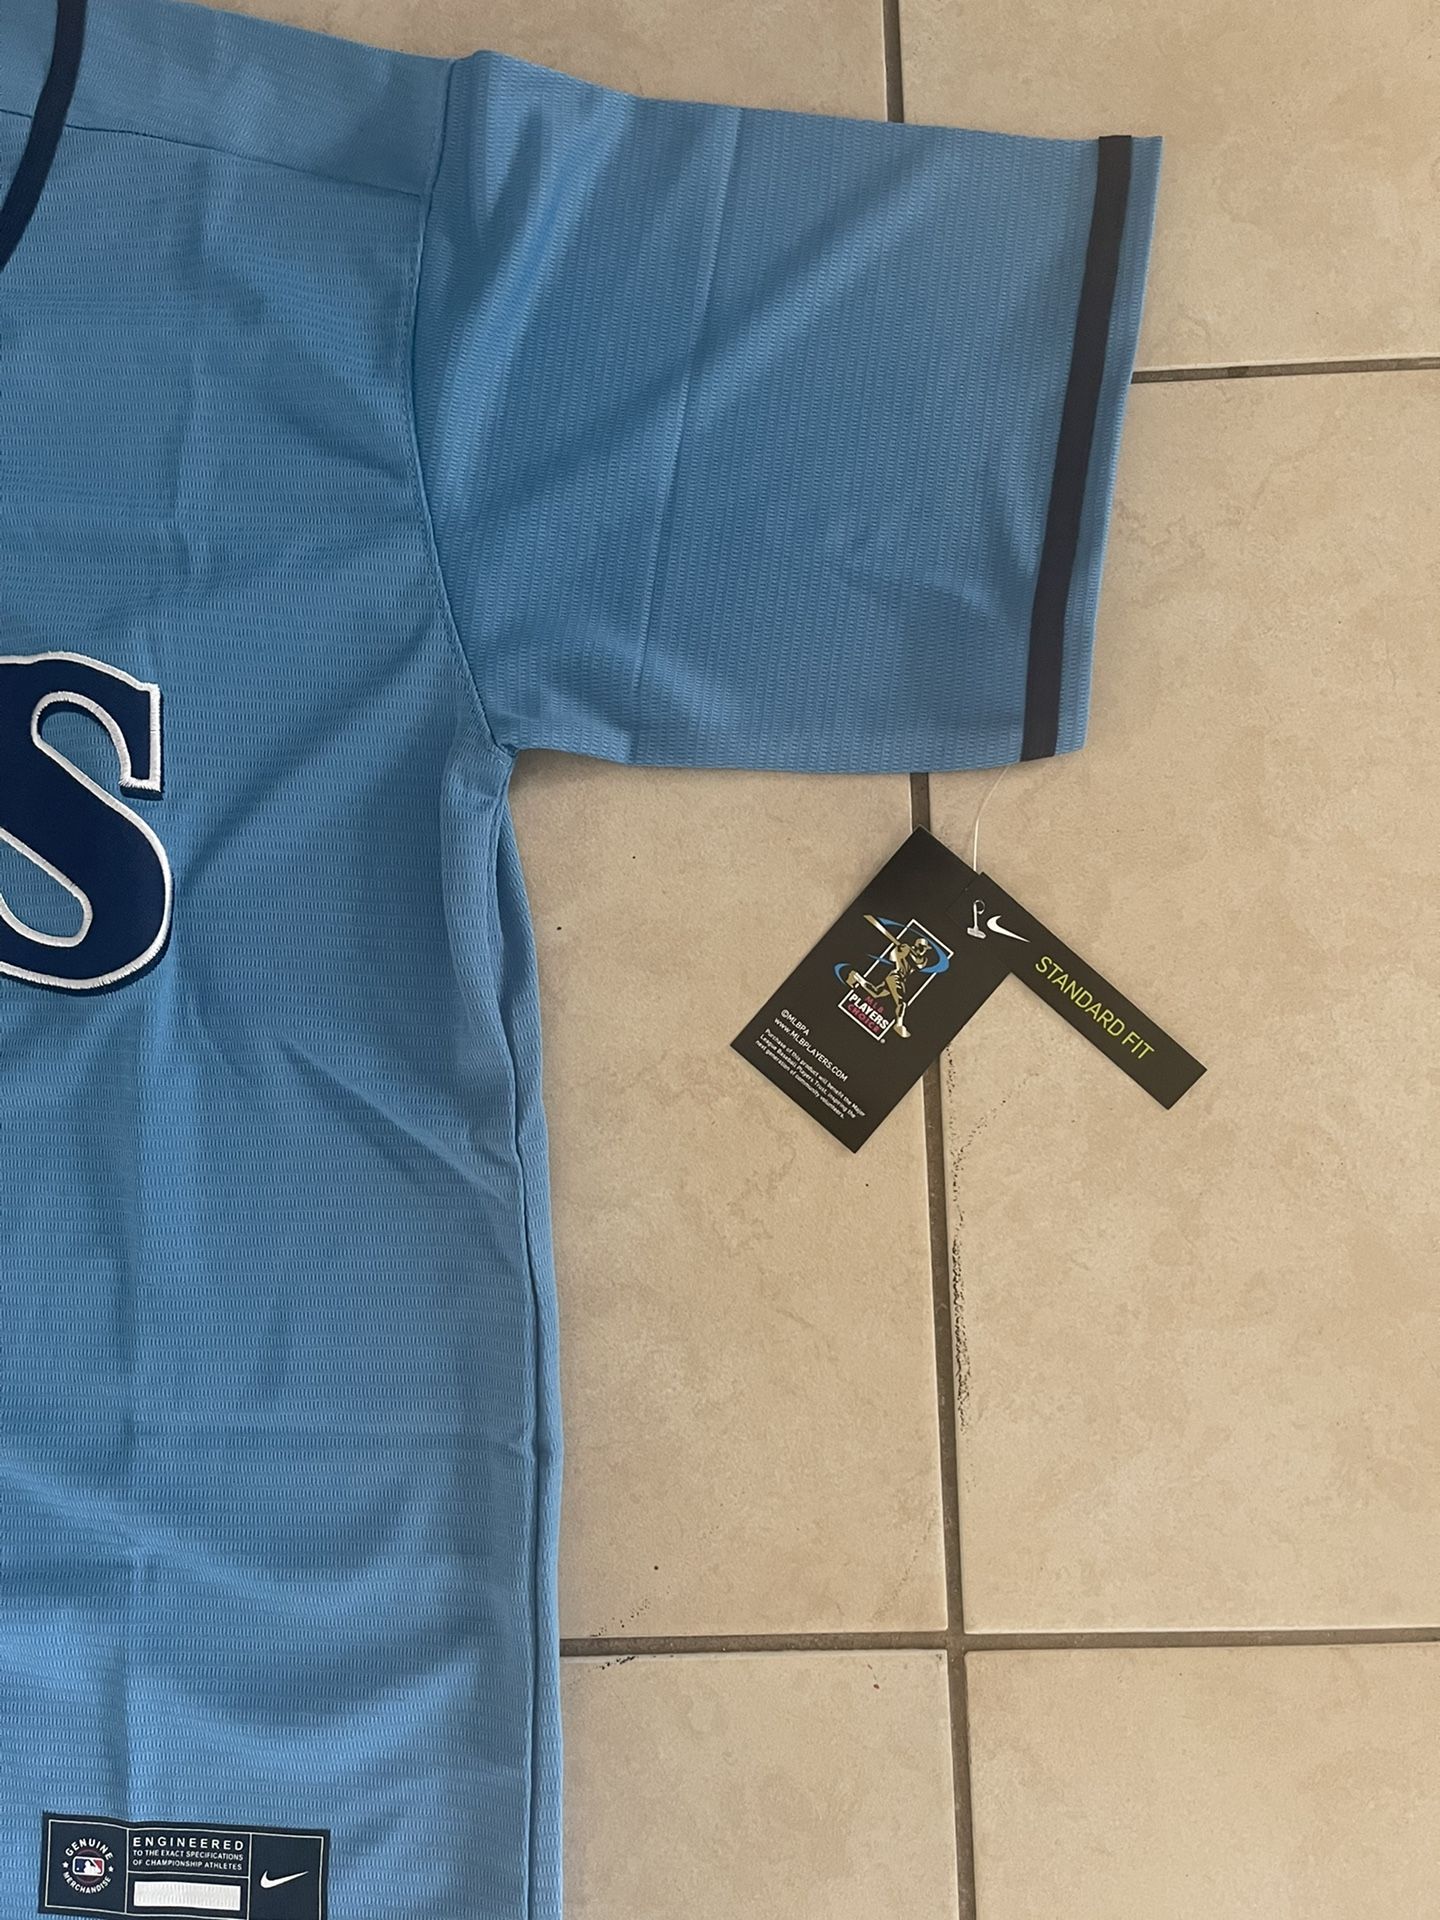 Wander Franco #5 Tampa Bay Rays Light Blue Jersey New 2022 for Sale in  Riverview, FL - OfferUp